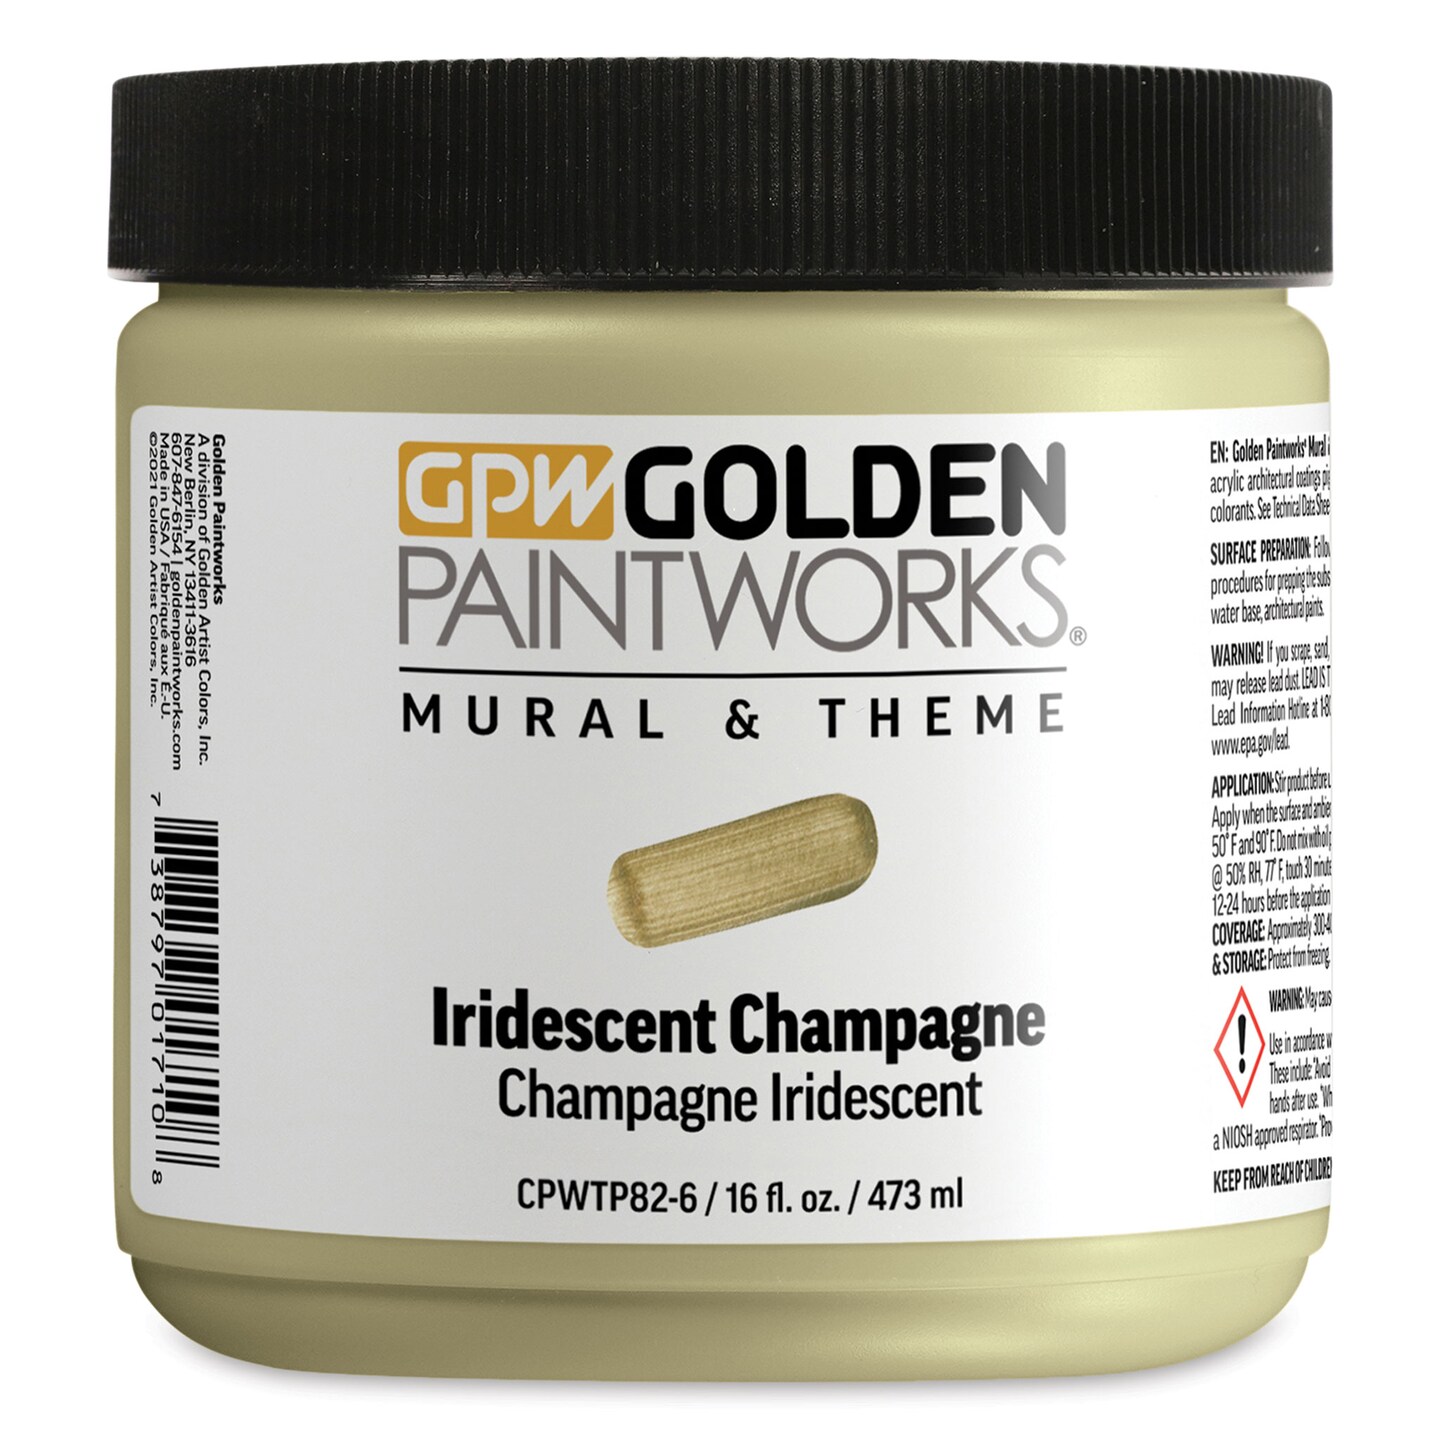 Golden Paintworks Mural and Theme Acrylic Paint - Iridescent Champagne, 16 oz, Jar